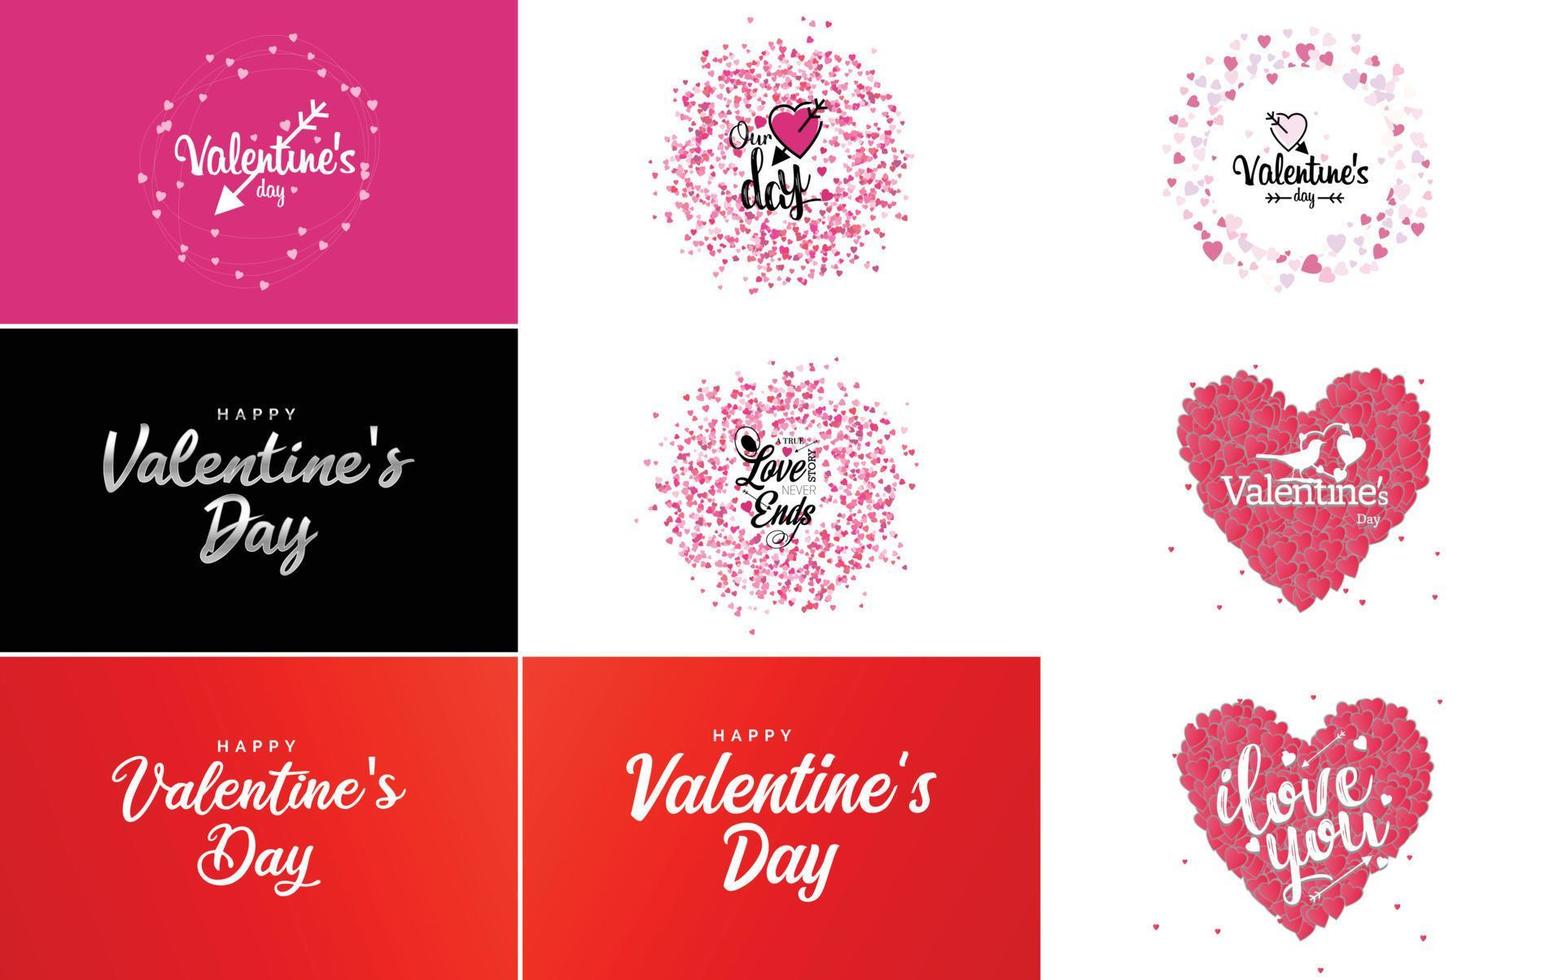 Happy Valentine's Day typography design with a watercolor texture and a heart-shaped wreath vector